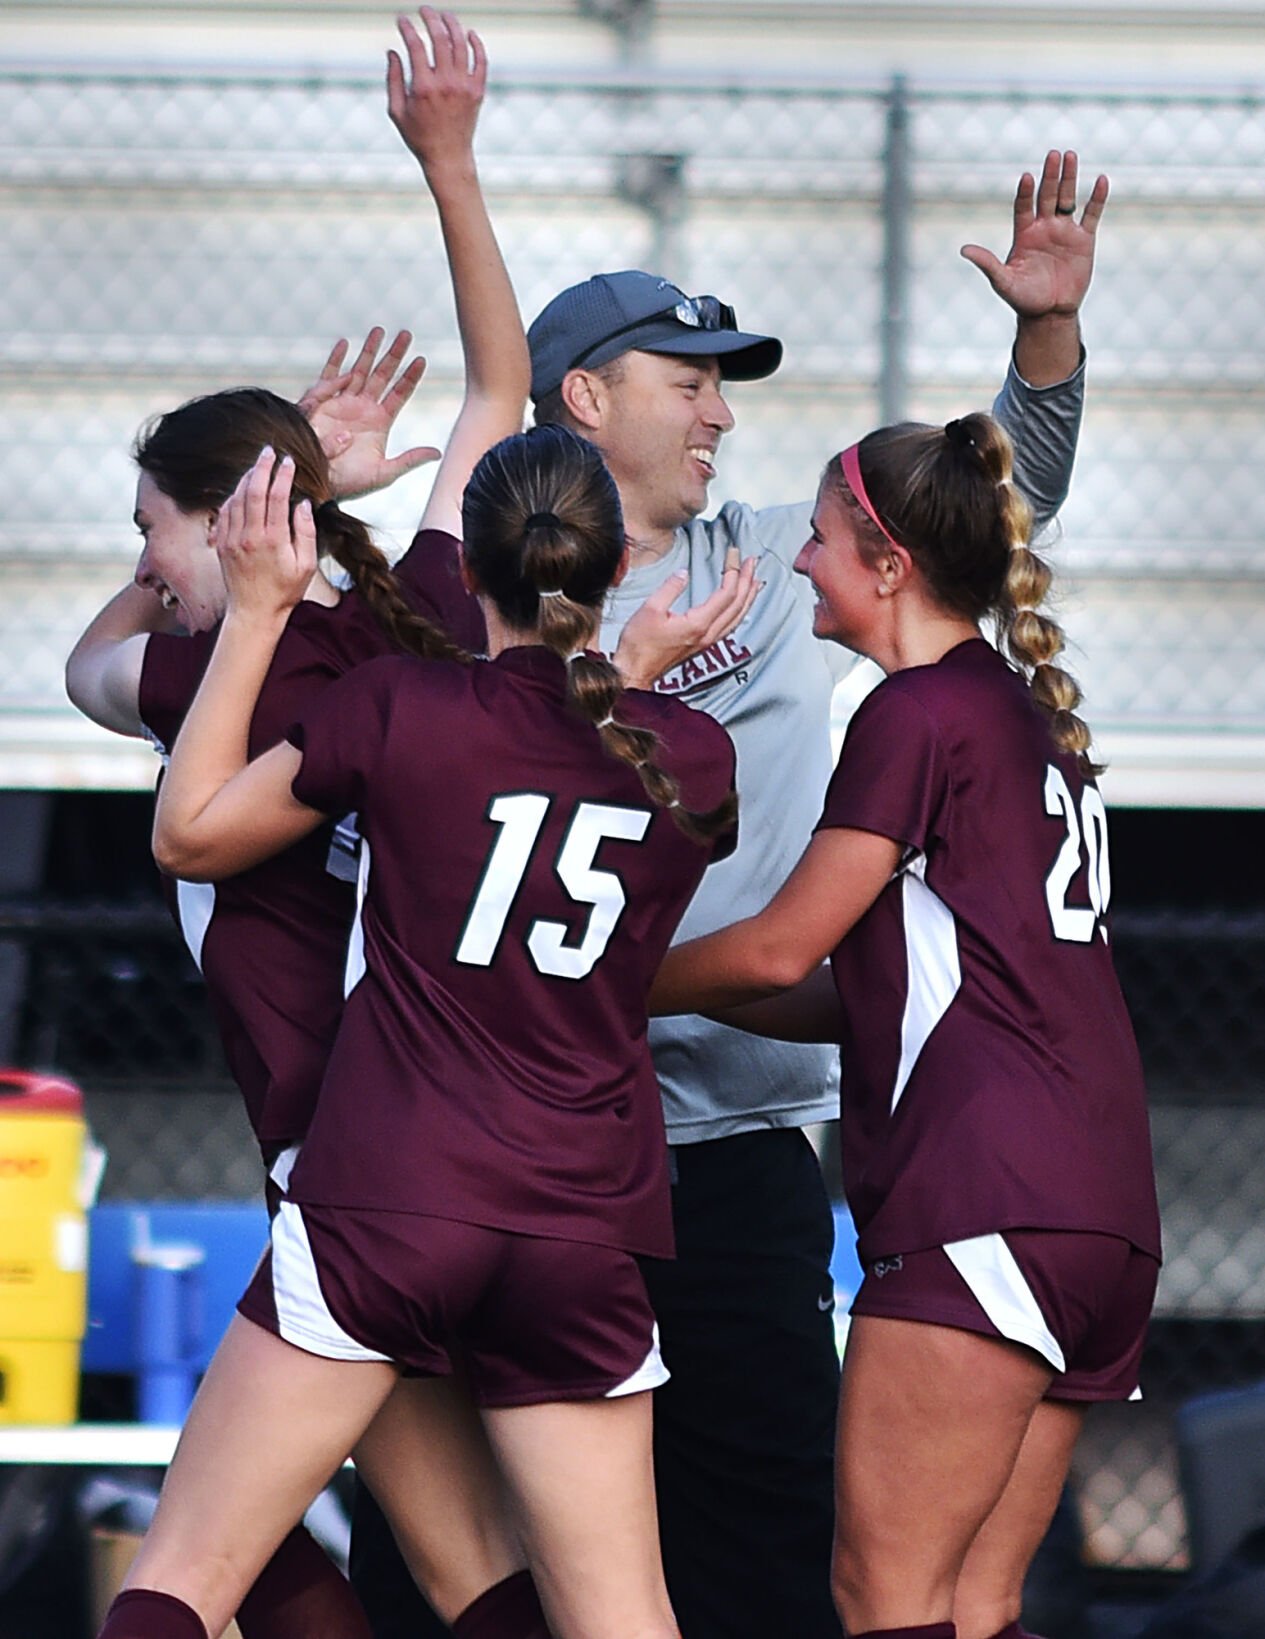 Jeff Baumann Leads Timberlane Regional Girls Soccer Team to First-Ever State Title